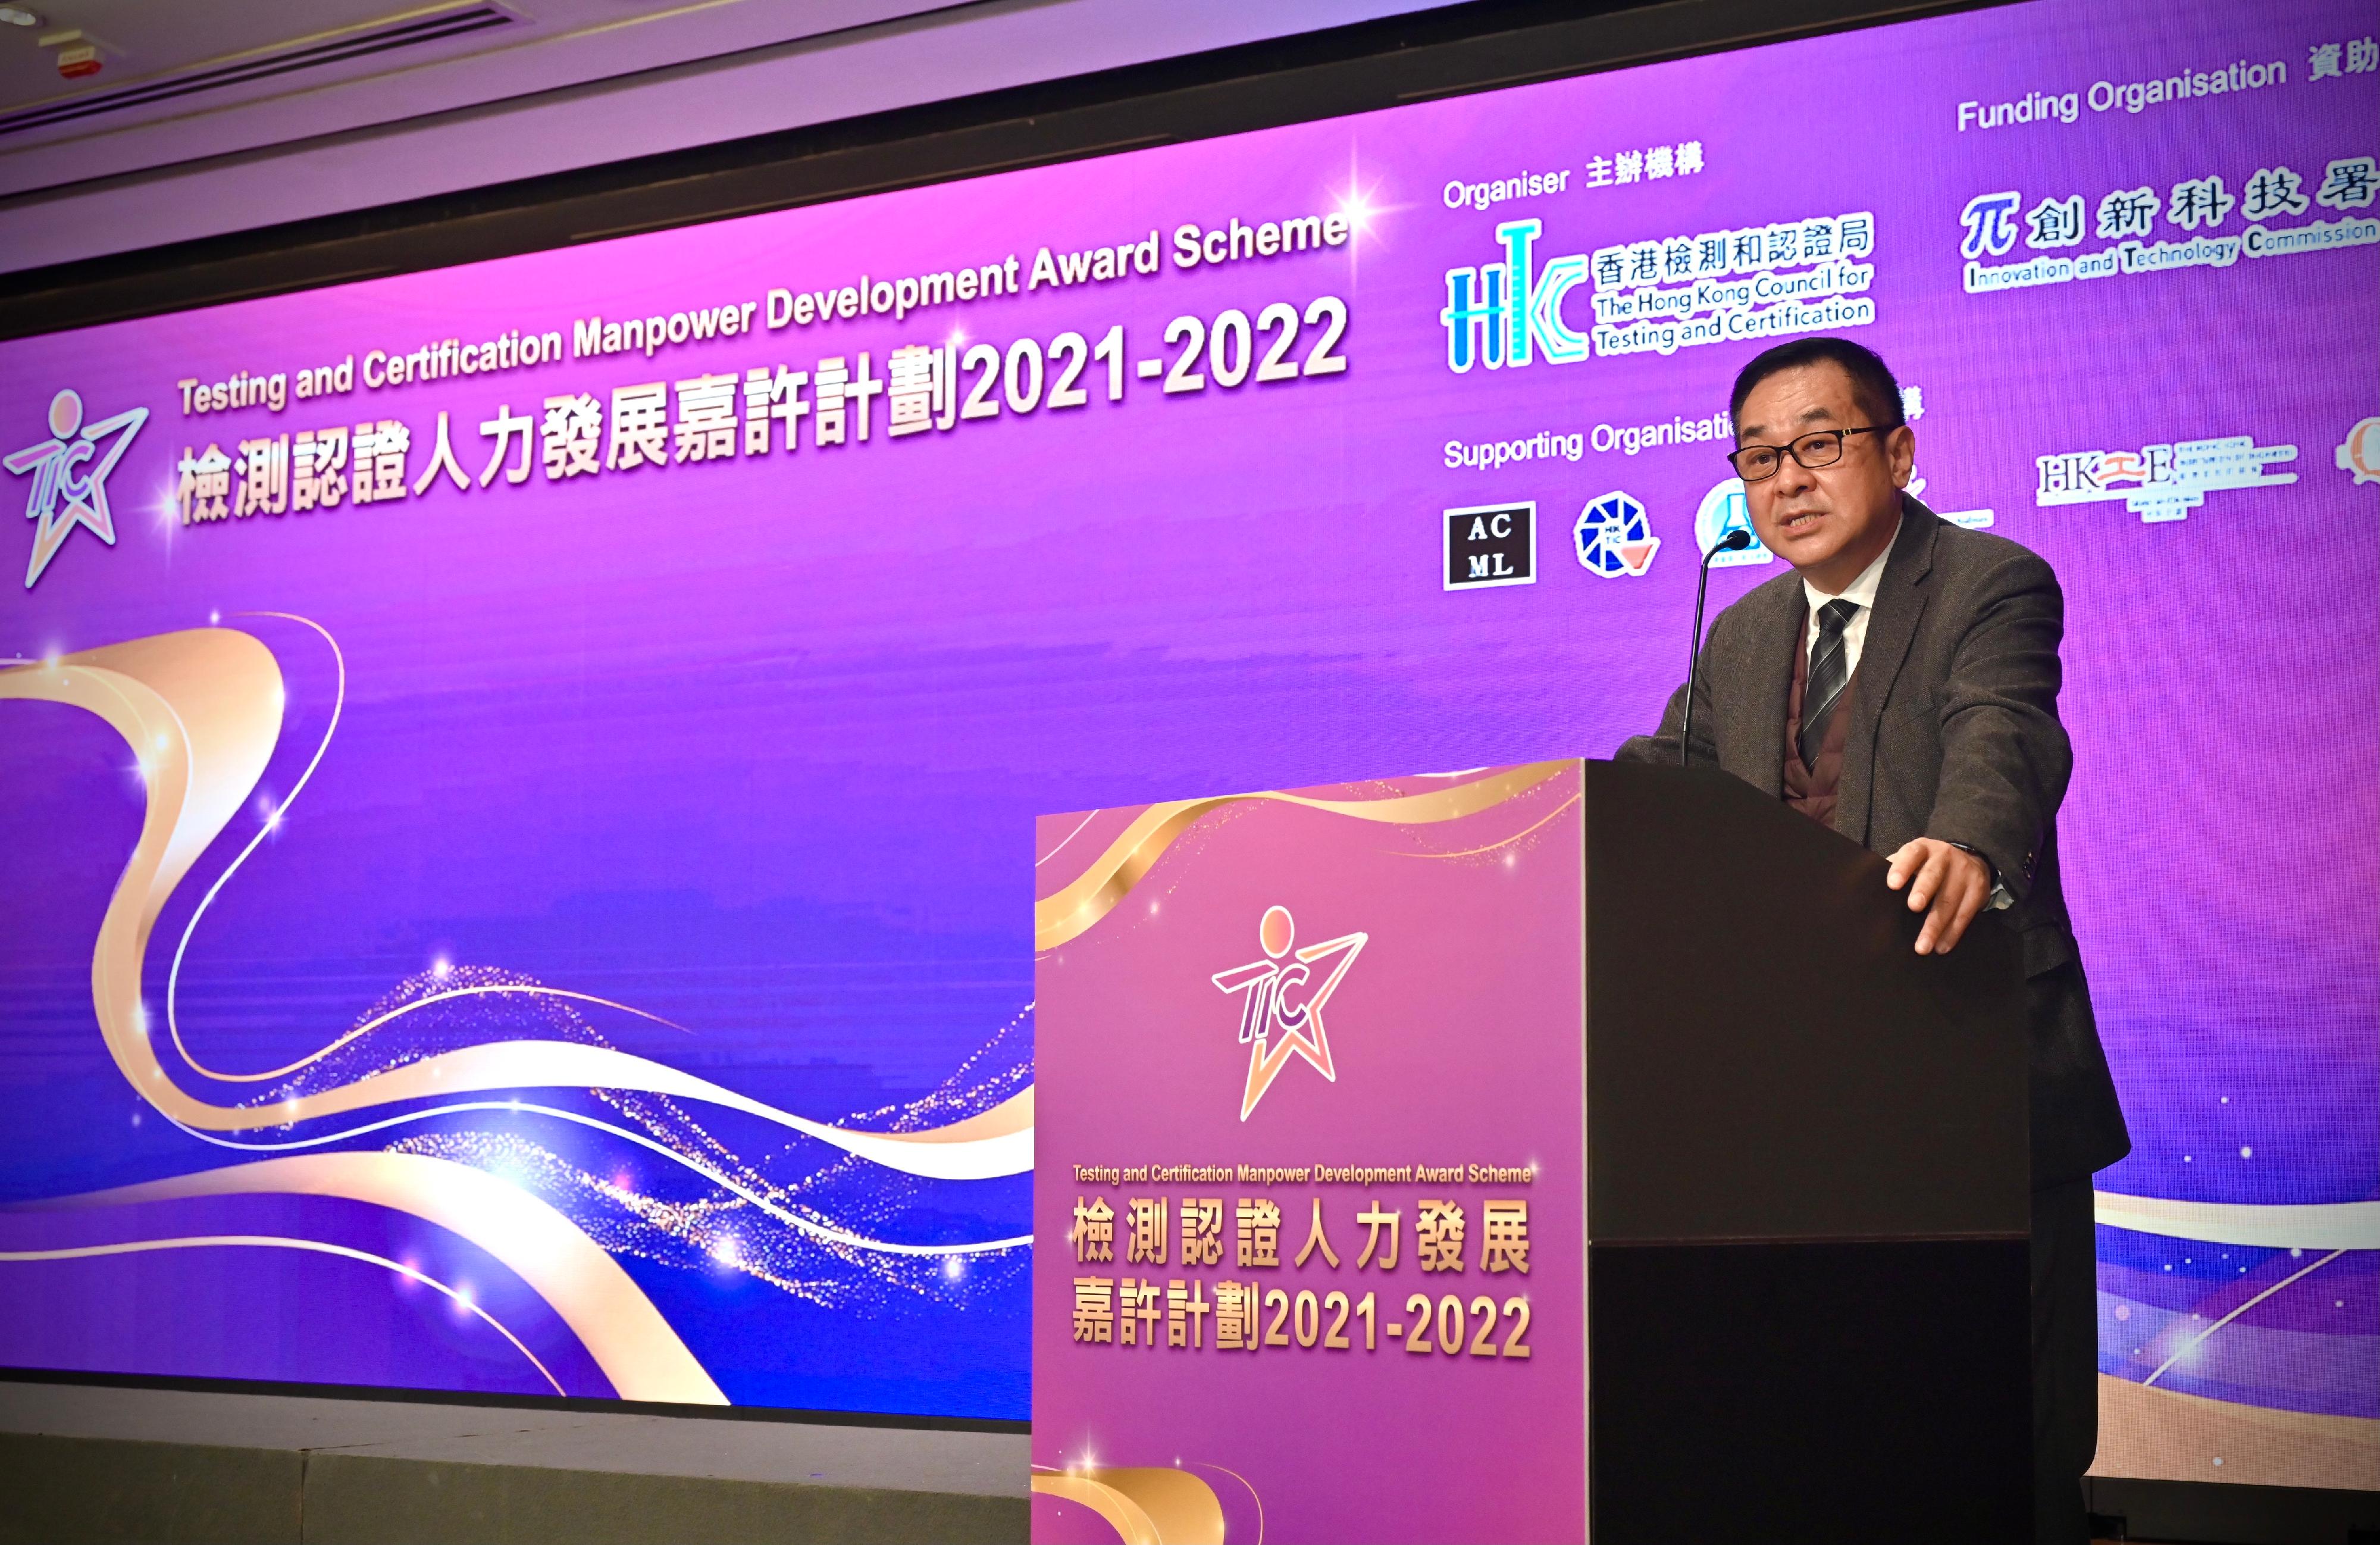 The Chairman of the Hong Kong Council for Testing and Certification, Professor Albert Yu, delivers the welcome speech at the award presentation ceremony of the Testing and Certification Manpower Development Award Scheme today (December 22).